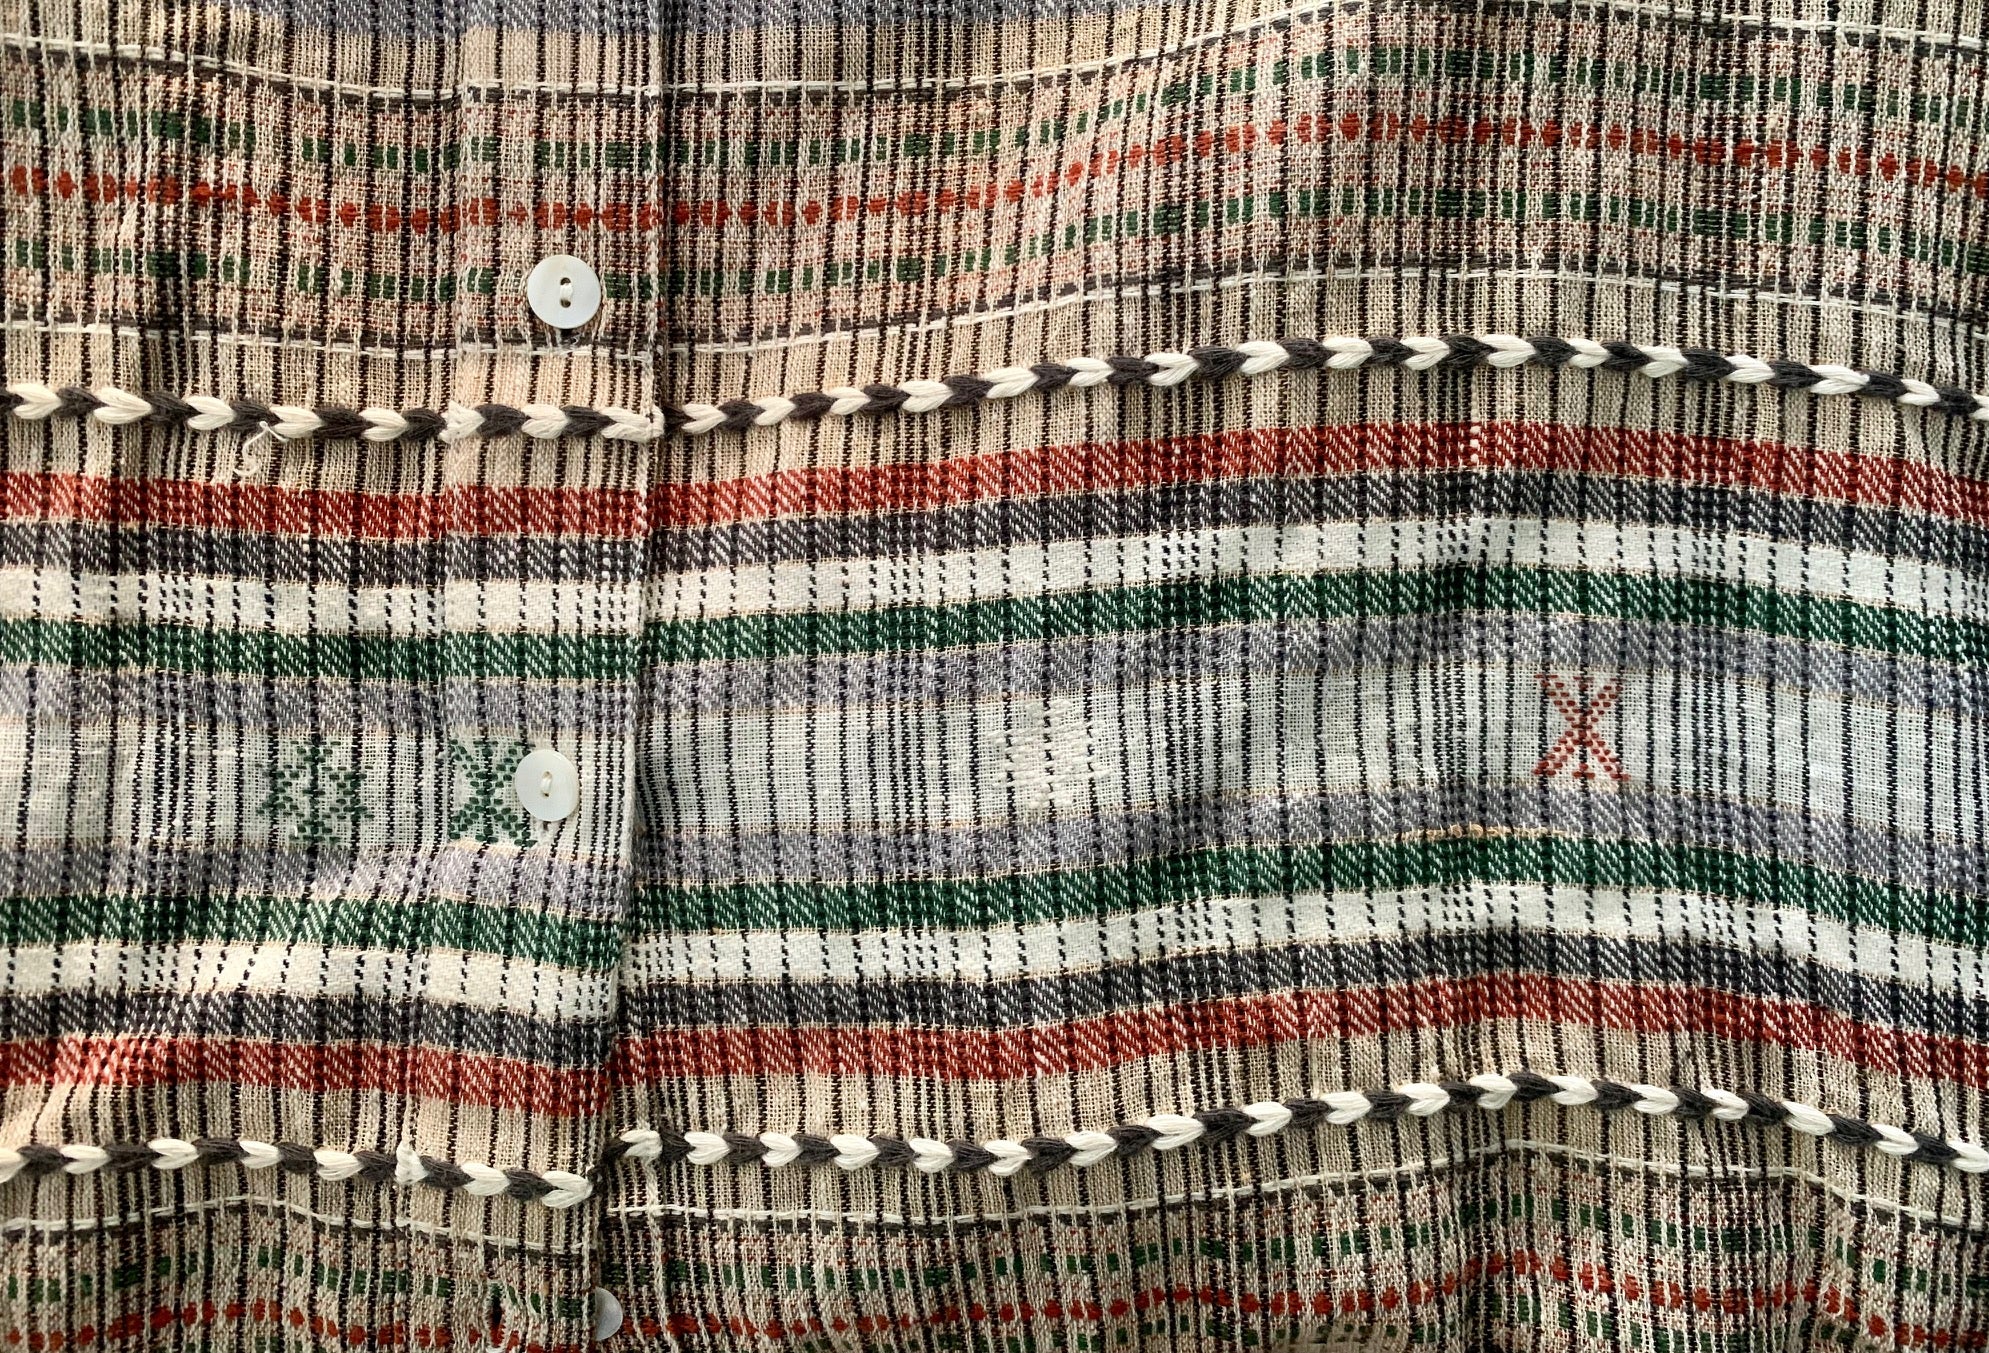 Jill beige striped and embroidered shirt